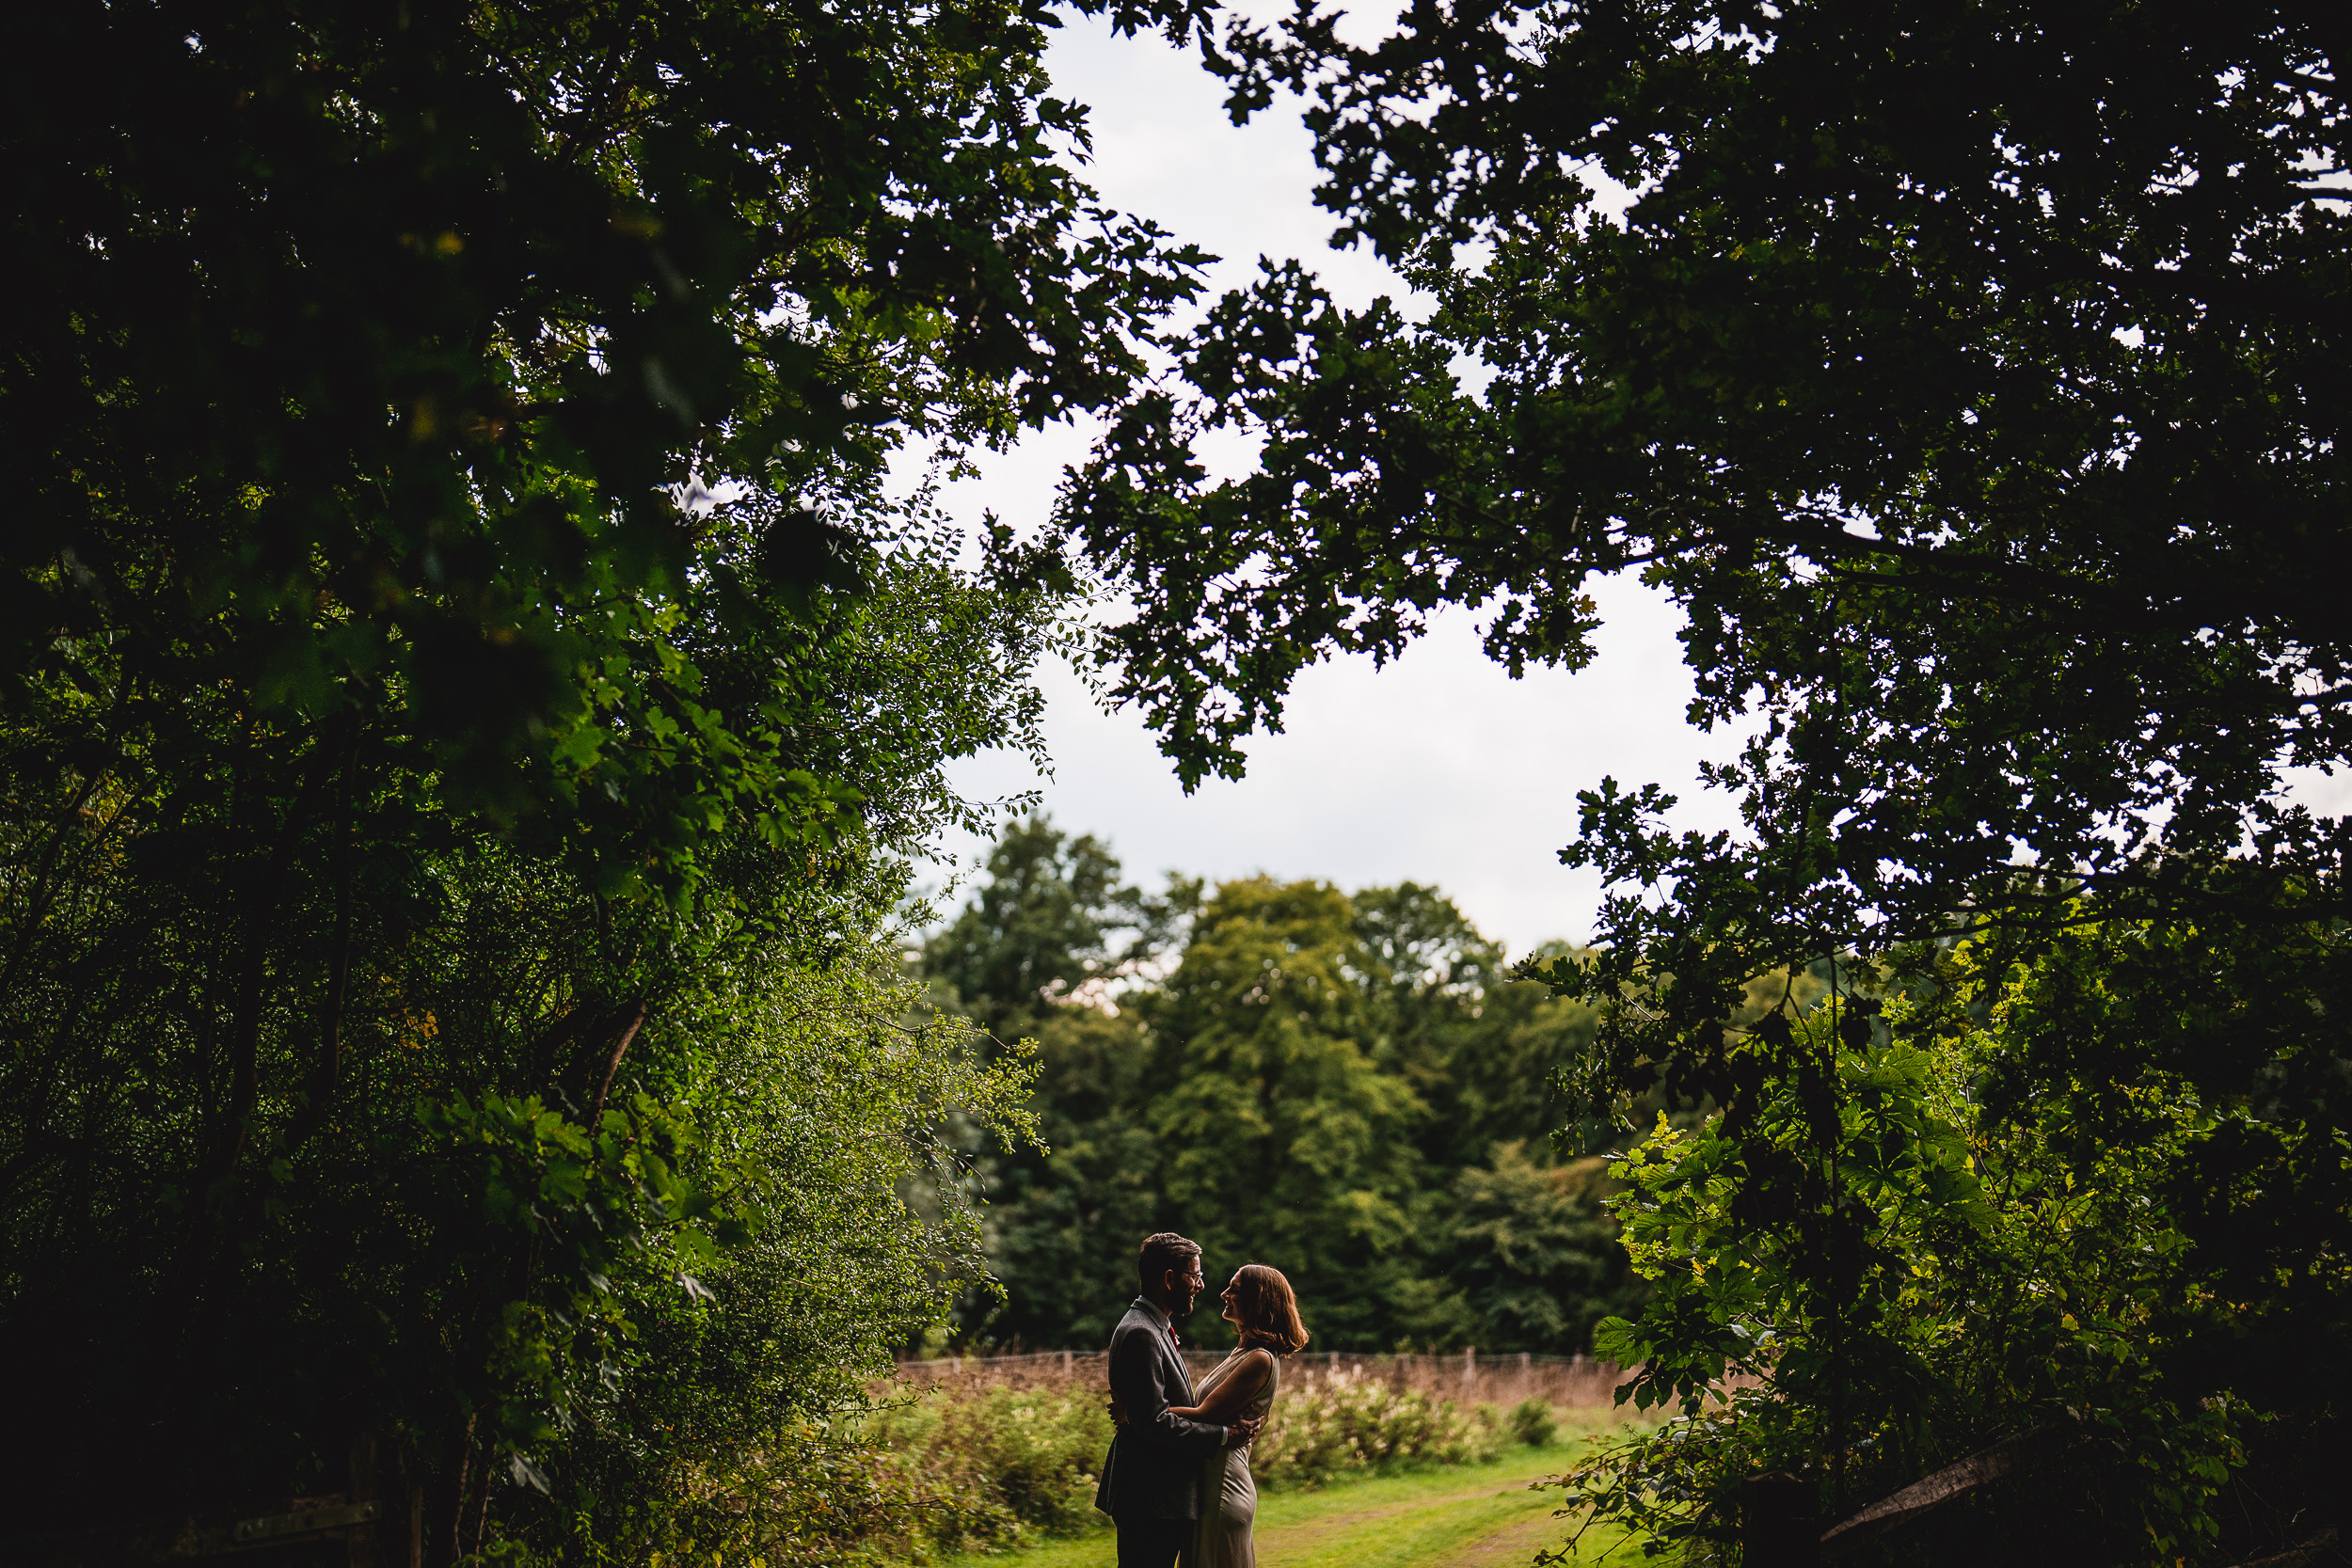 Ridge Farm Weddings. A bride and groom posing elegantly amidst the tranquility of a secluded clearing in the woods.